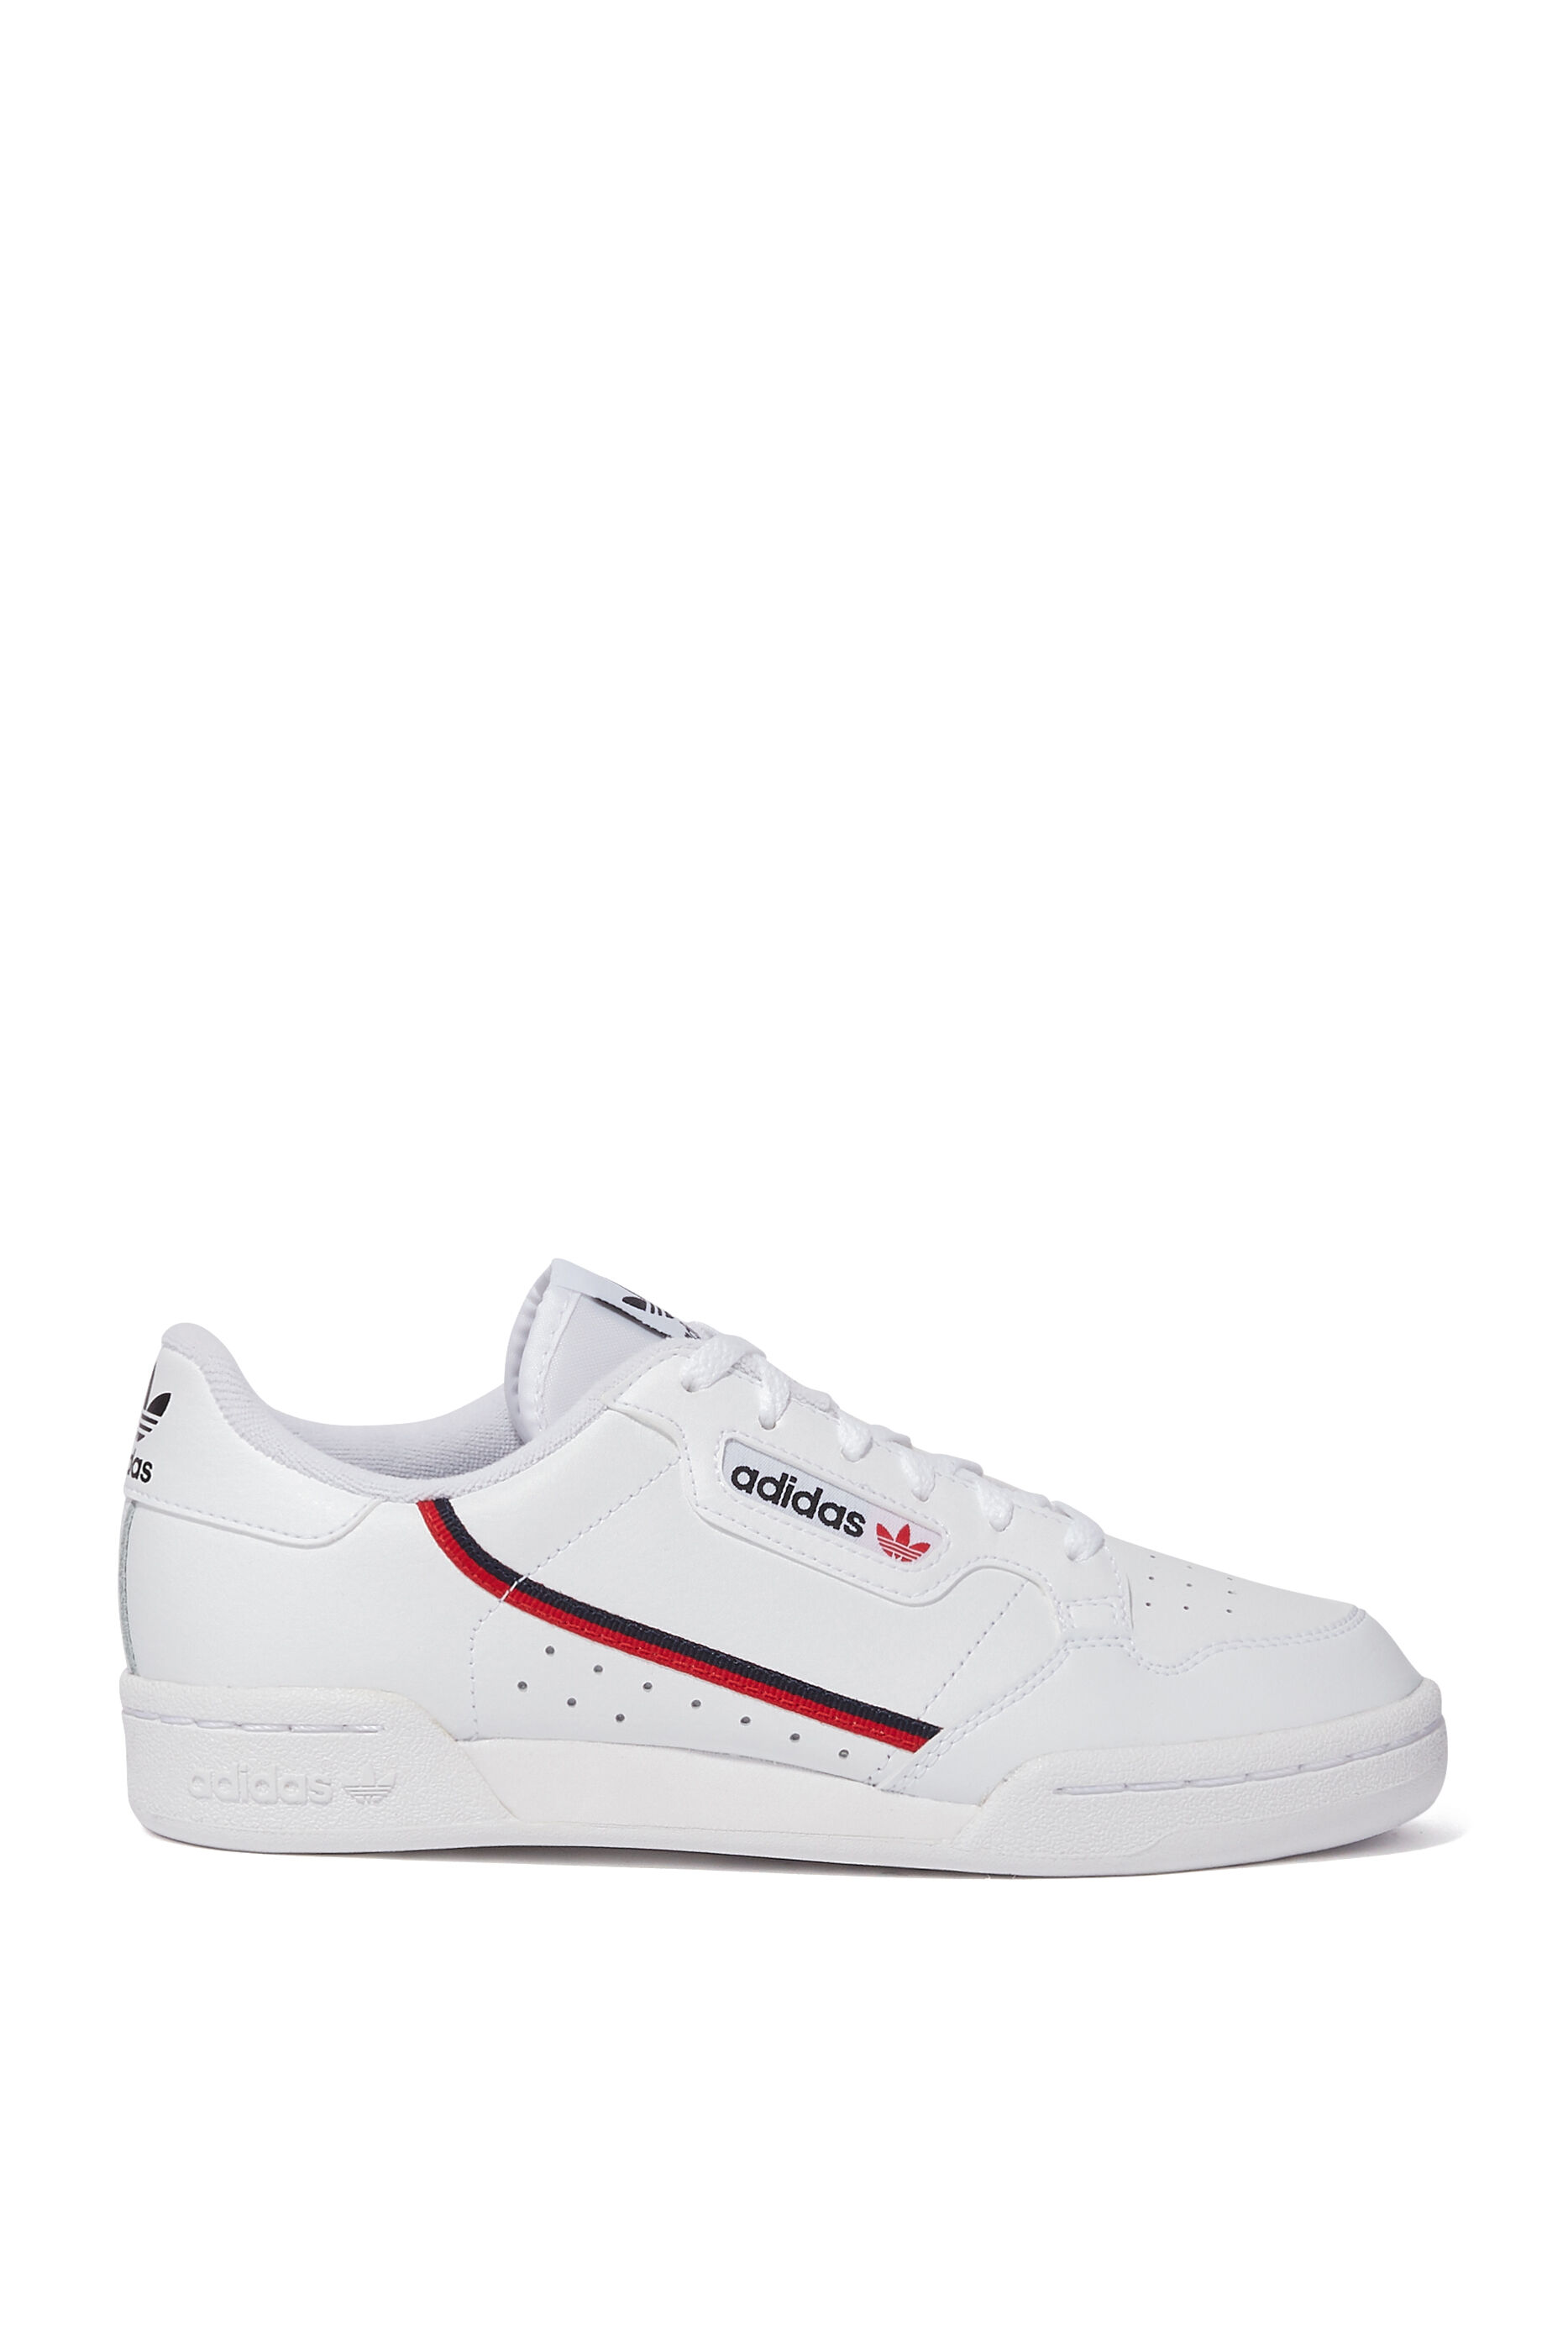 Buy Adidas Continental 80 Sneakers 